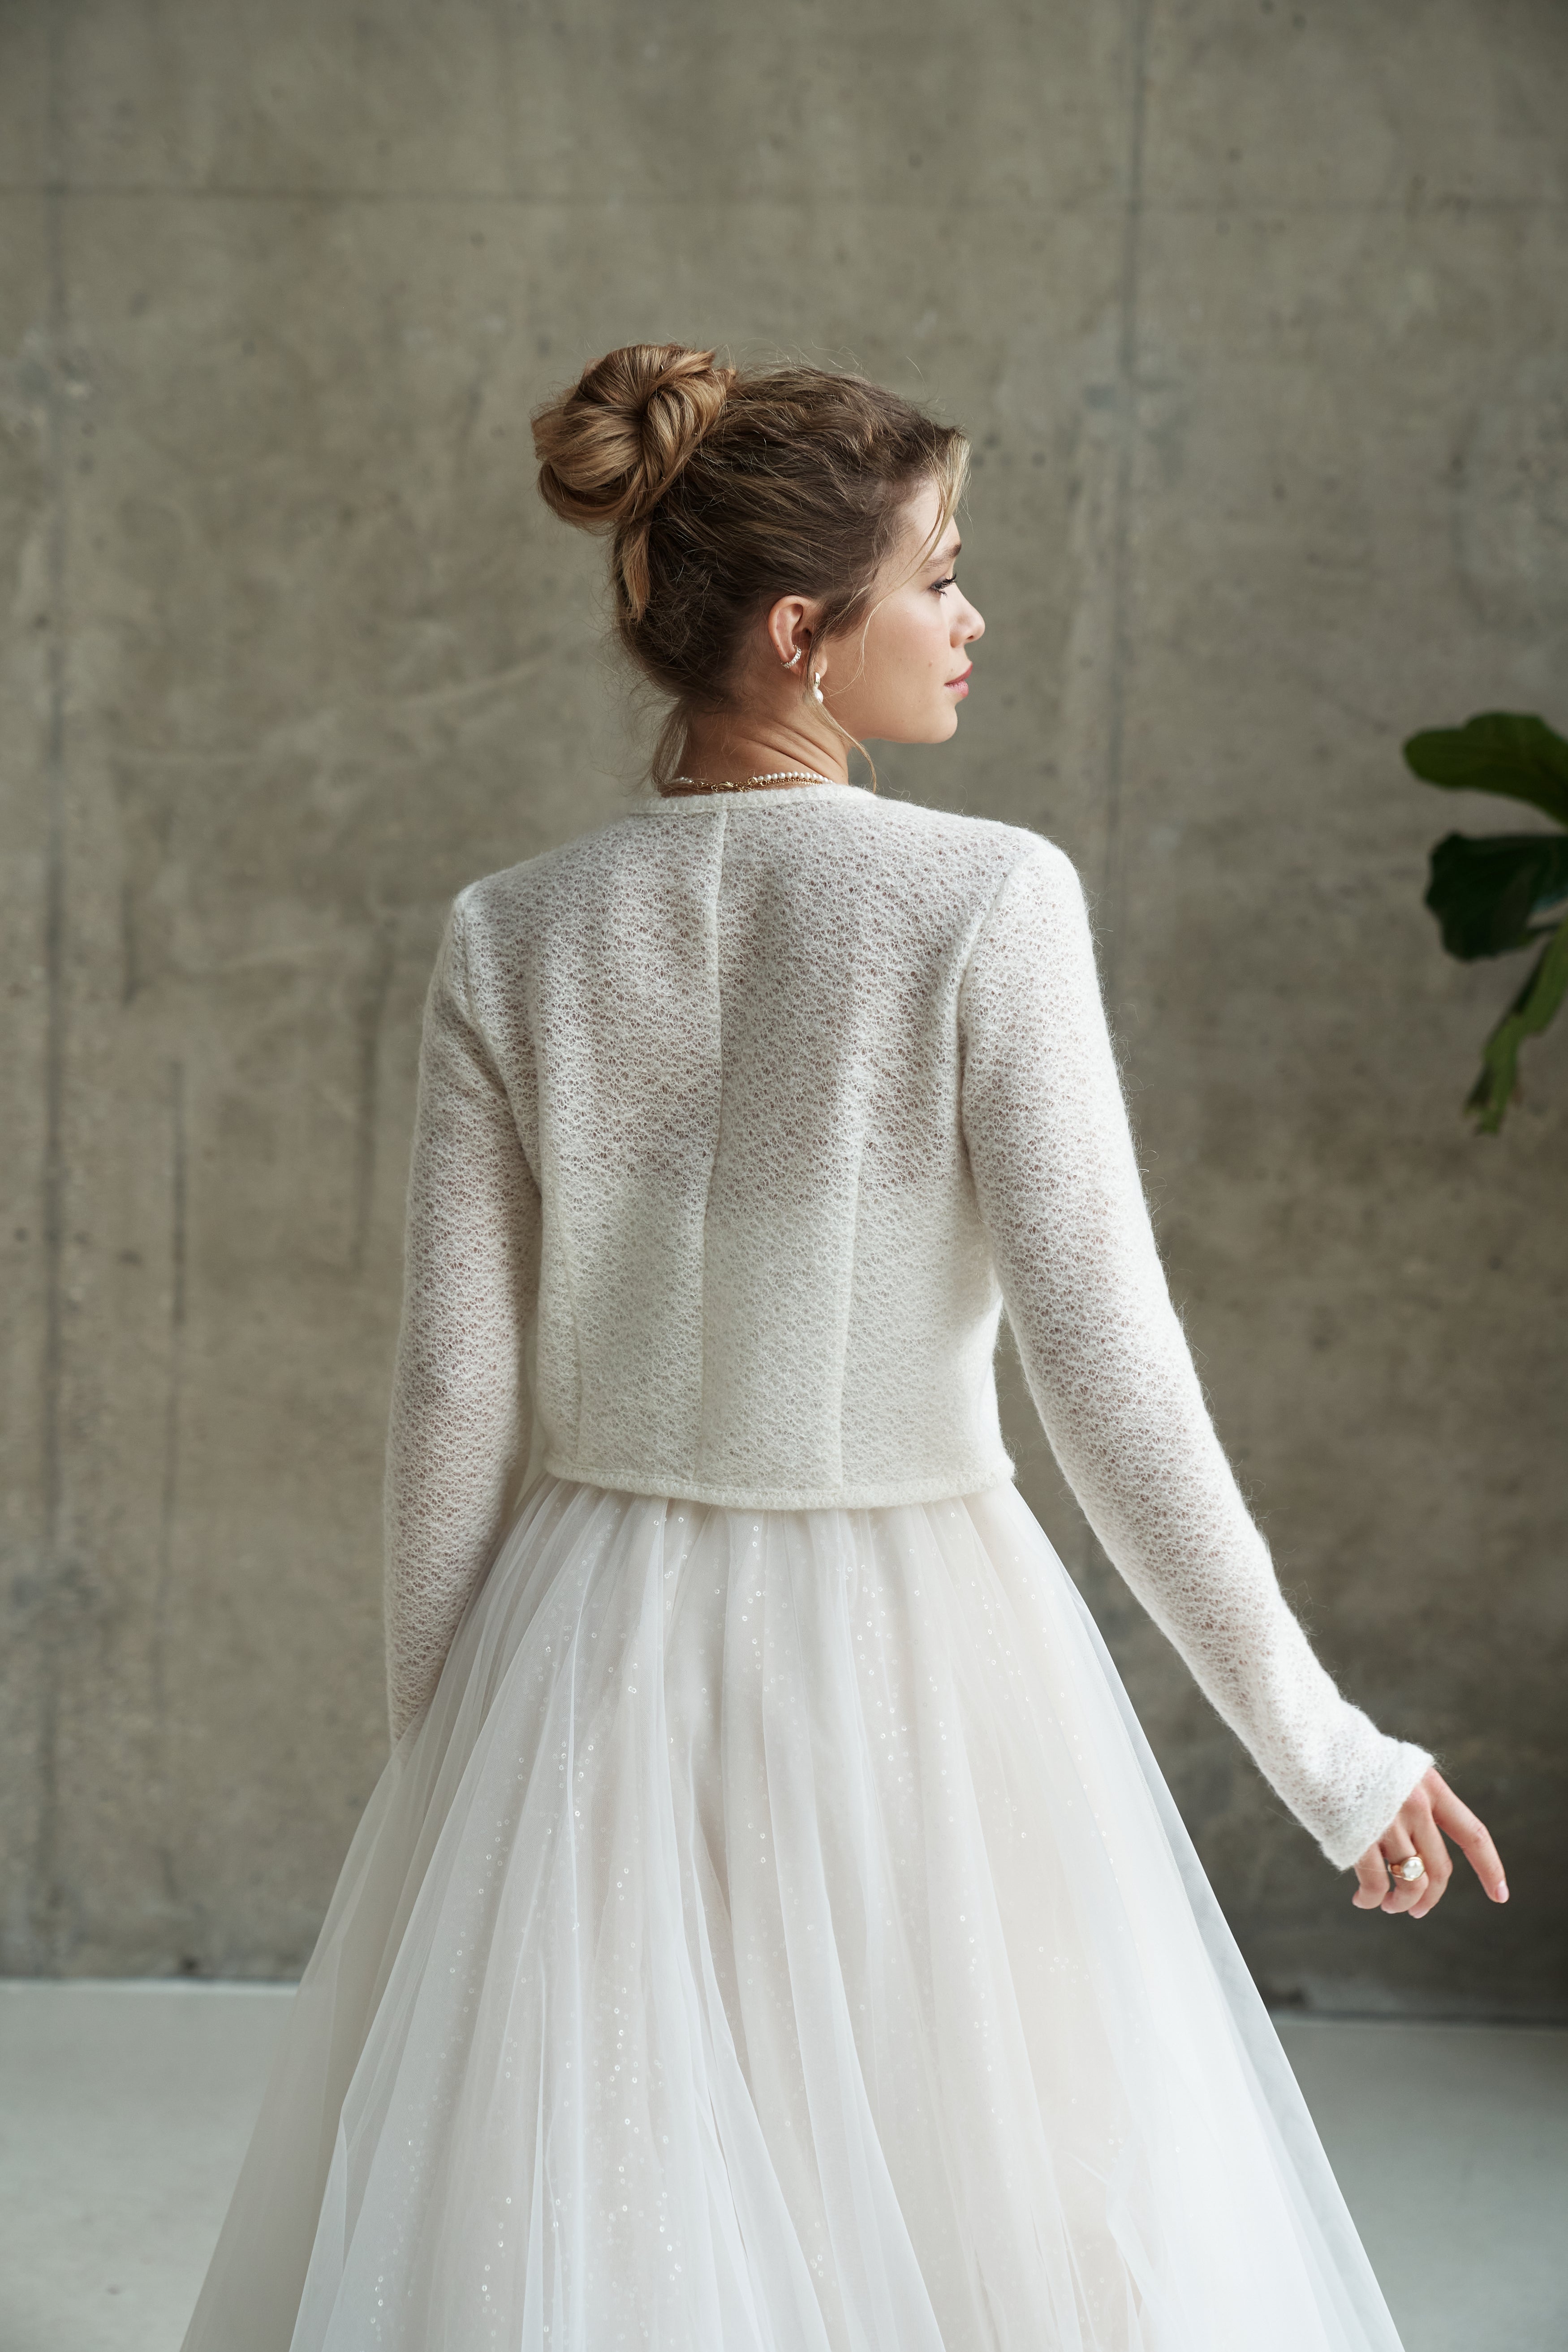 Light wedding cardigan made of wool. Knitted bridal sweater with buttons